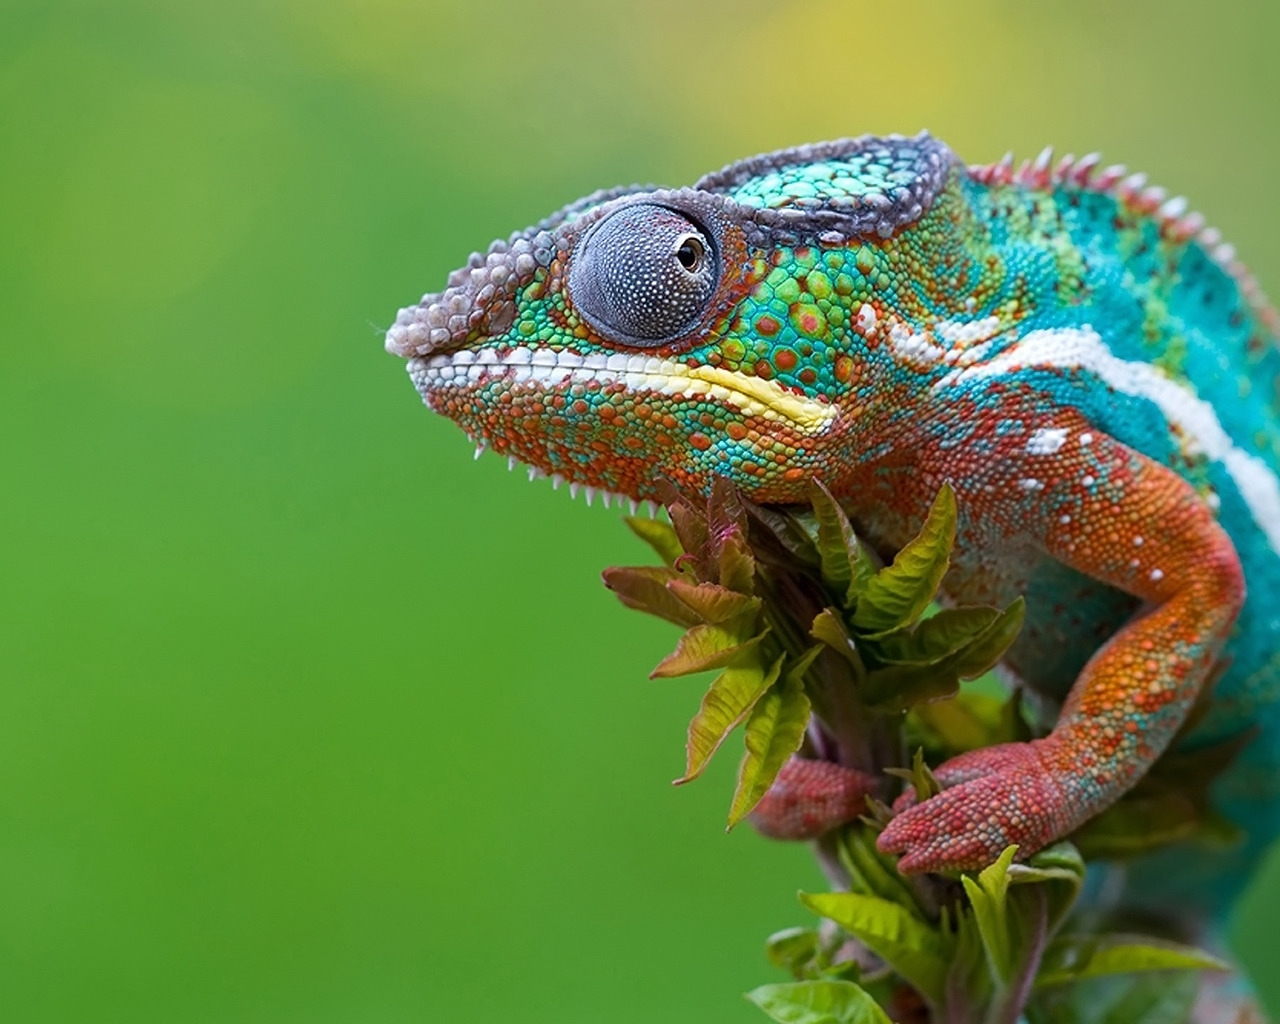 Chameleon Camouflage for 1280 x 1024 resolution